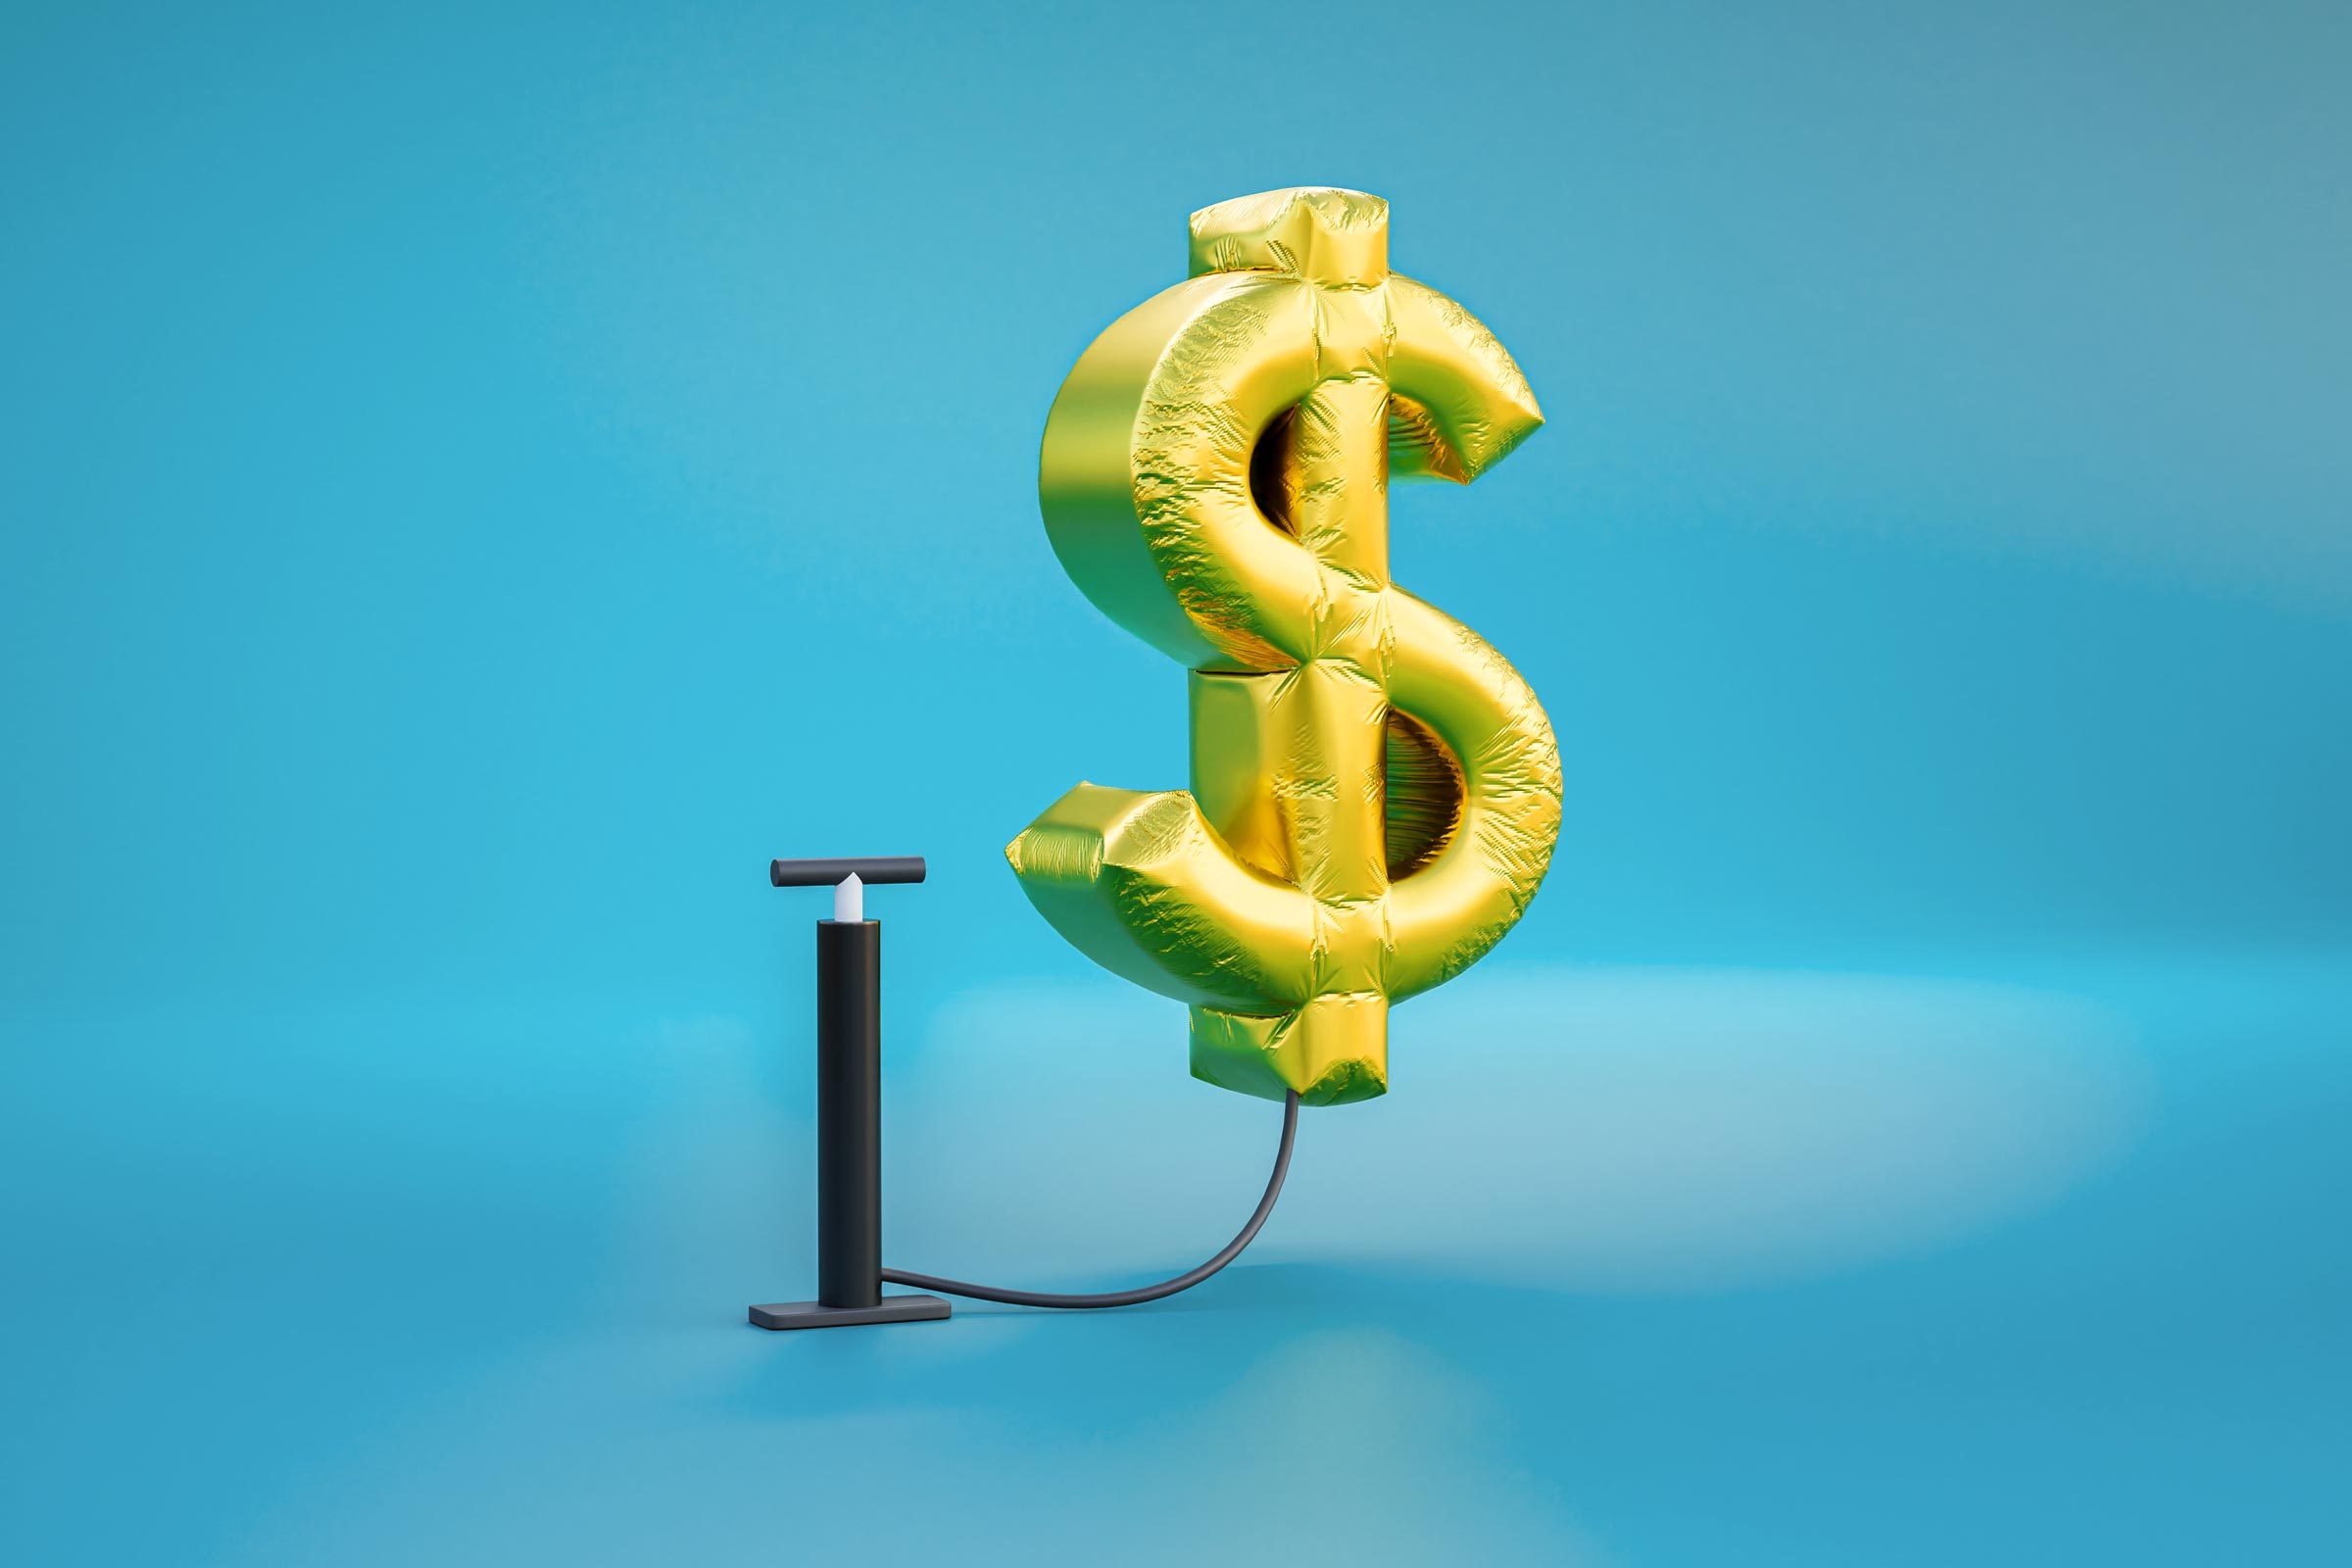 Inflation computer generated image of on a US dollar sign on a blue background